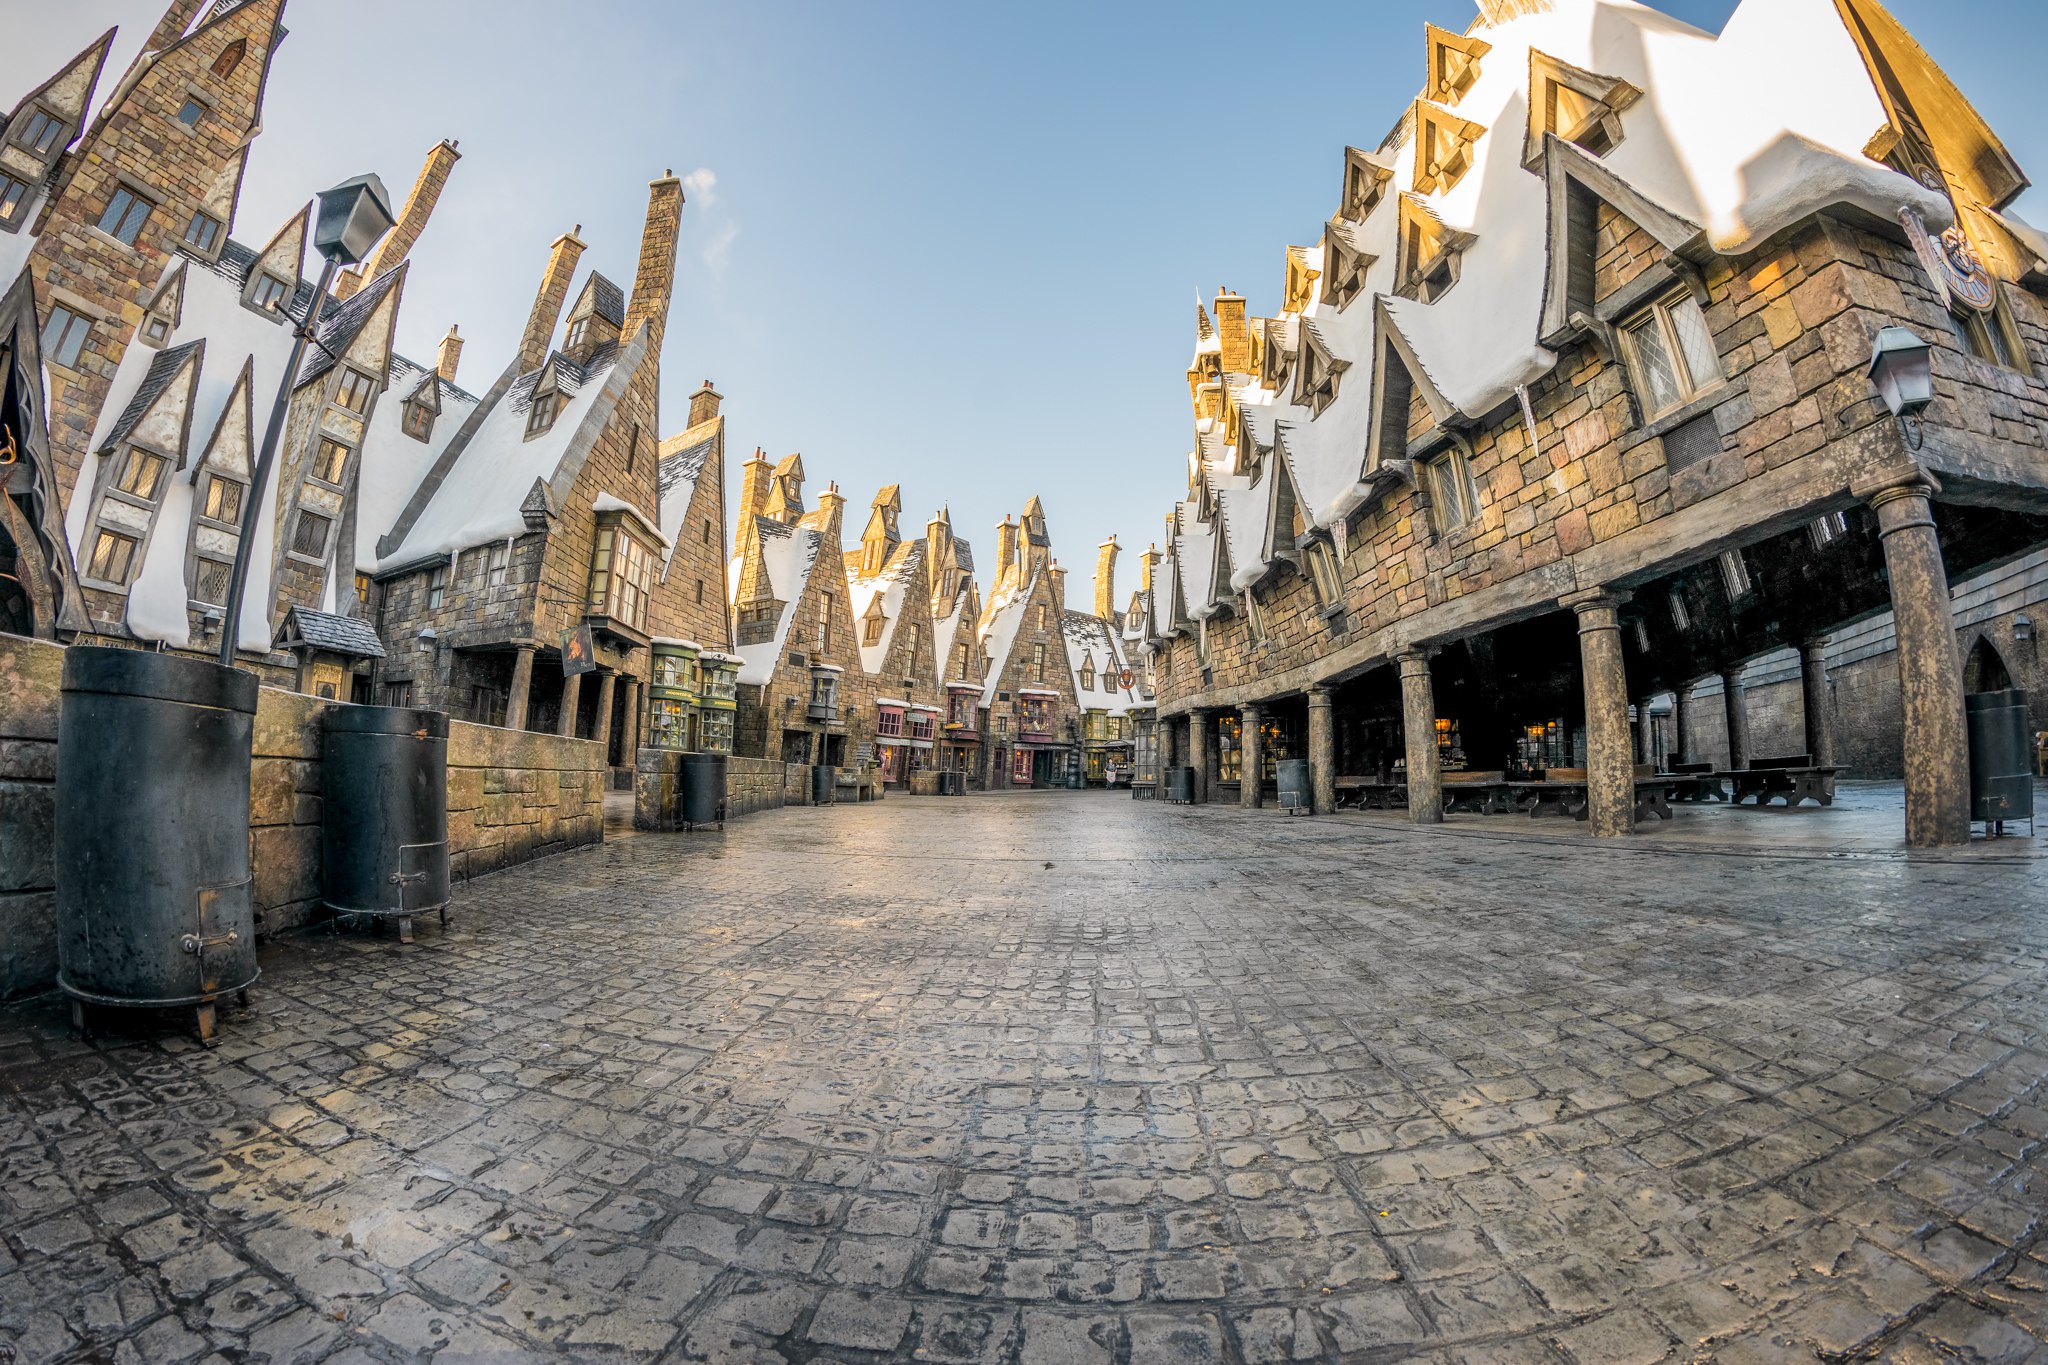 9 remarkable photos of the Wizarding World after hours